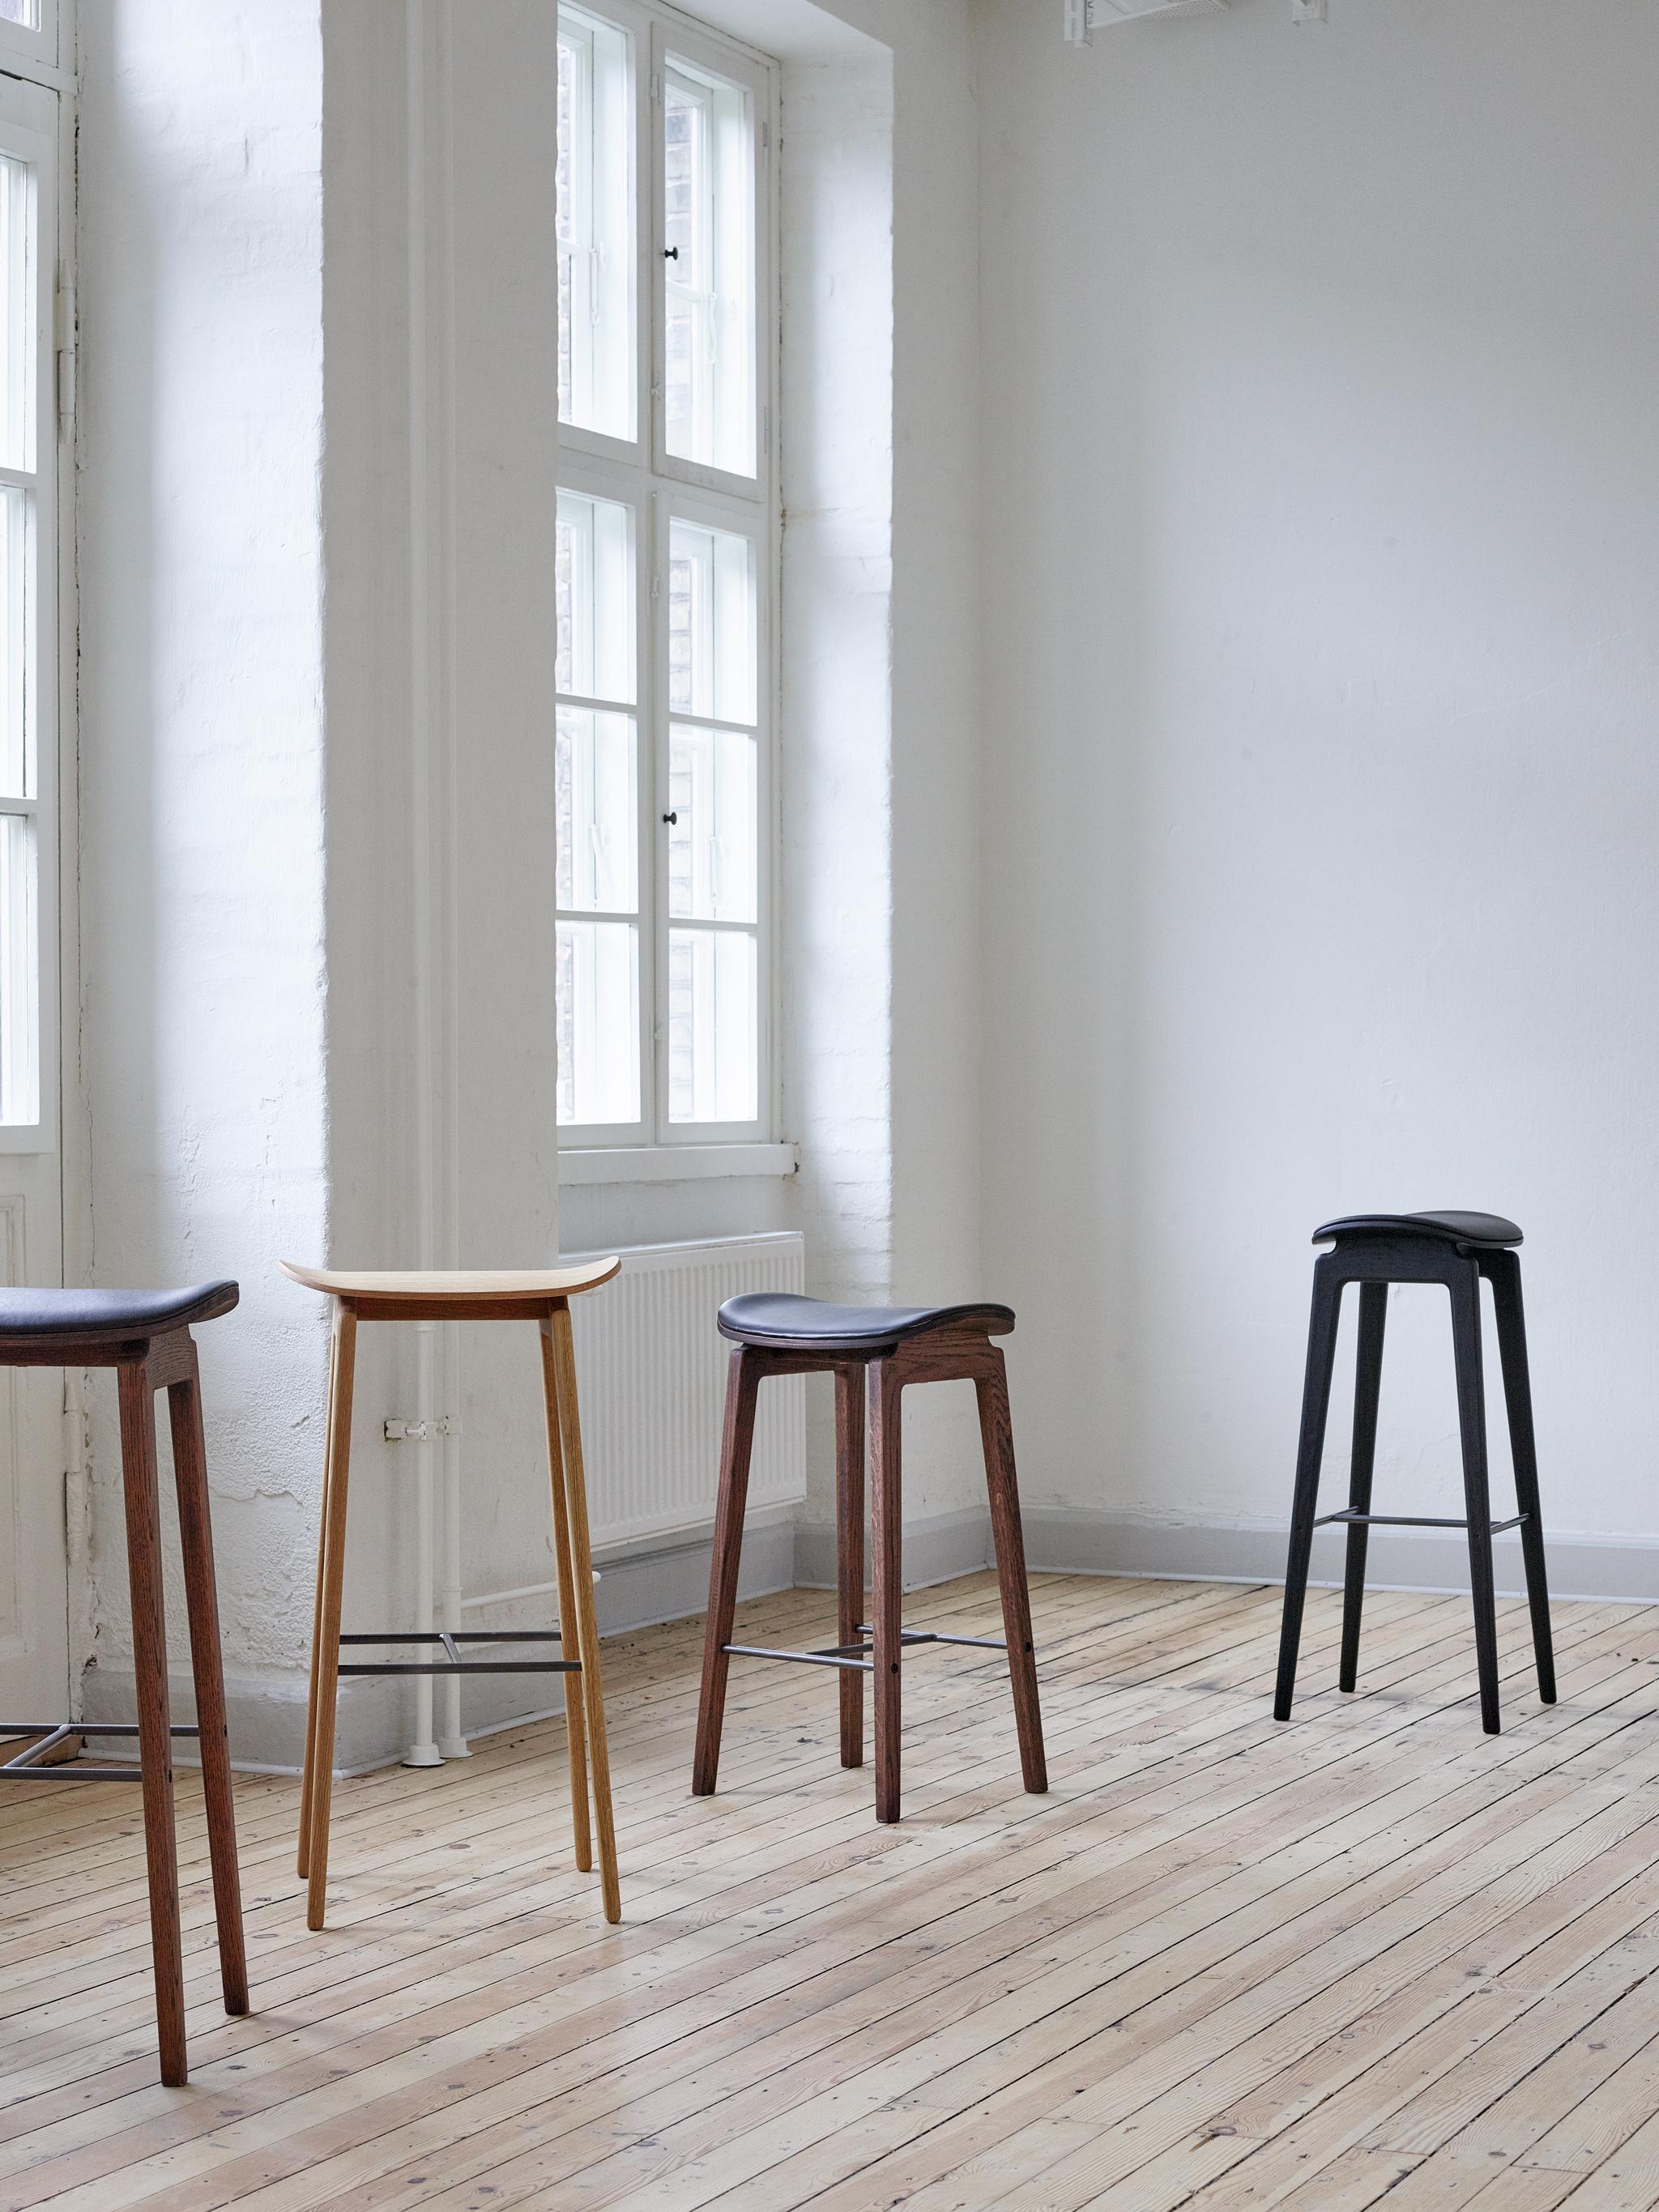 NY11 Bar Stool 65 by NORR11
Dimensions: D 30,5 x W 40,5 x H 65 cm.
Materials: Dark smoked oak and upholstery.
Upholstery: Dunes Camel 21004. 

Available in different oak finishes: Natural oak, light smoked oak, dark smoked oak, black oak. Also